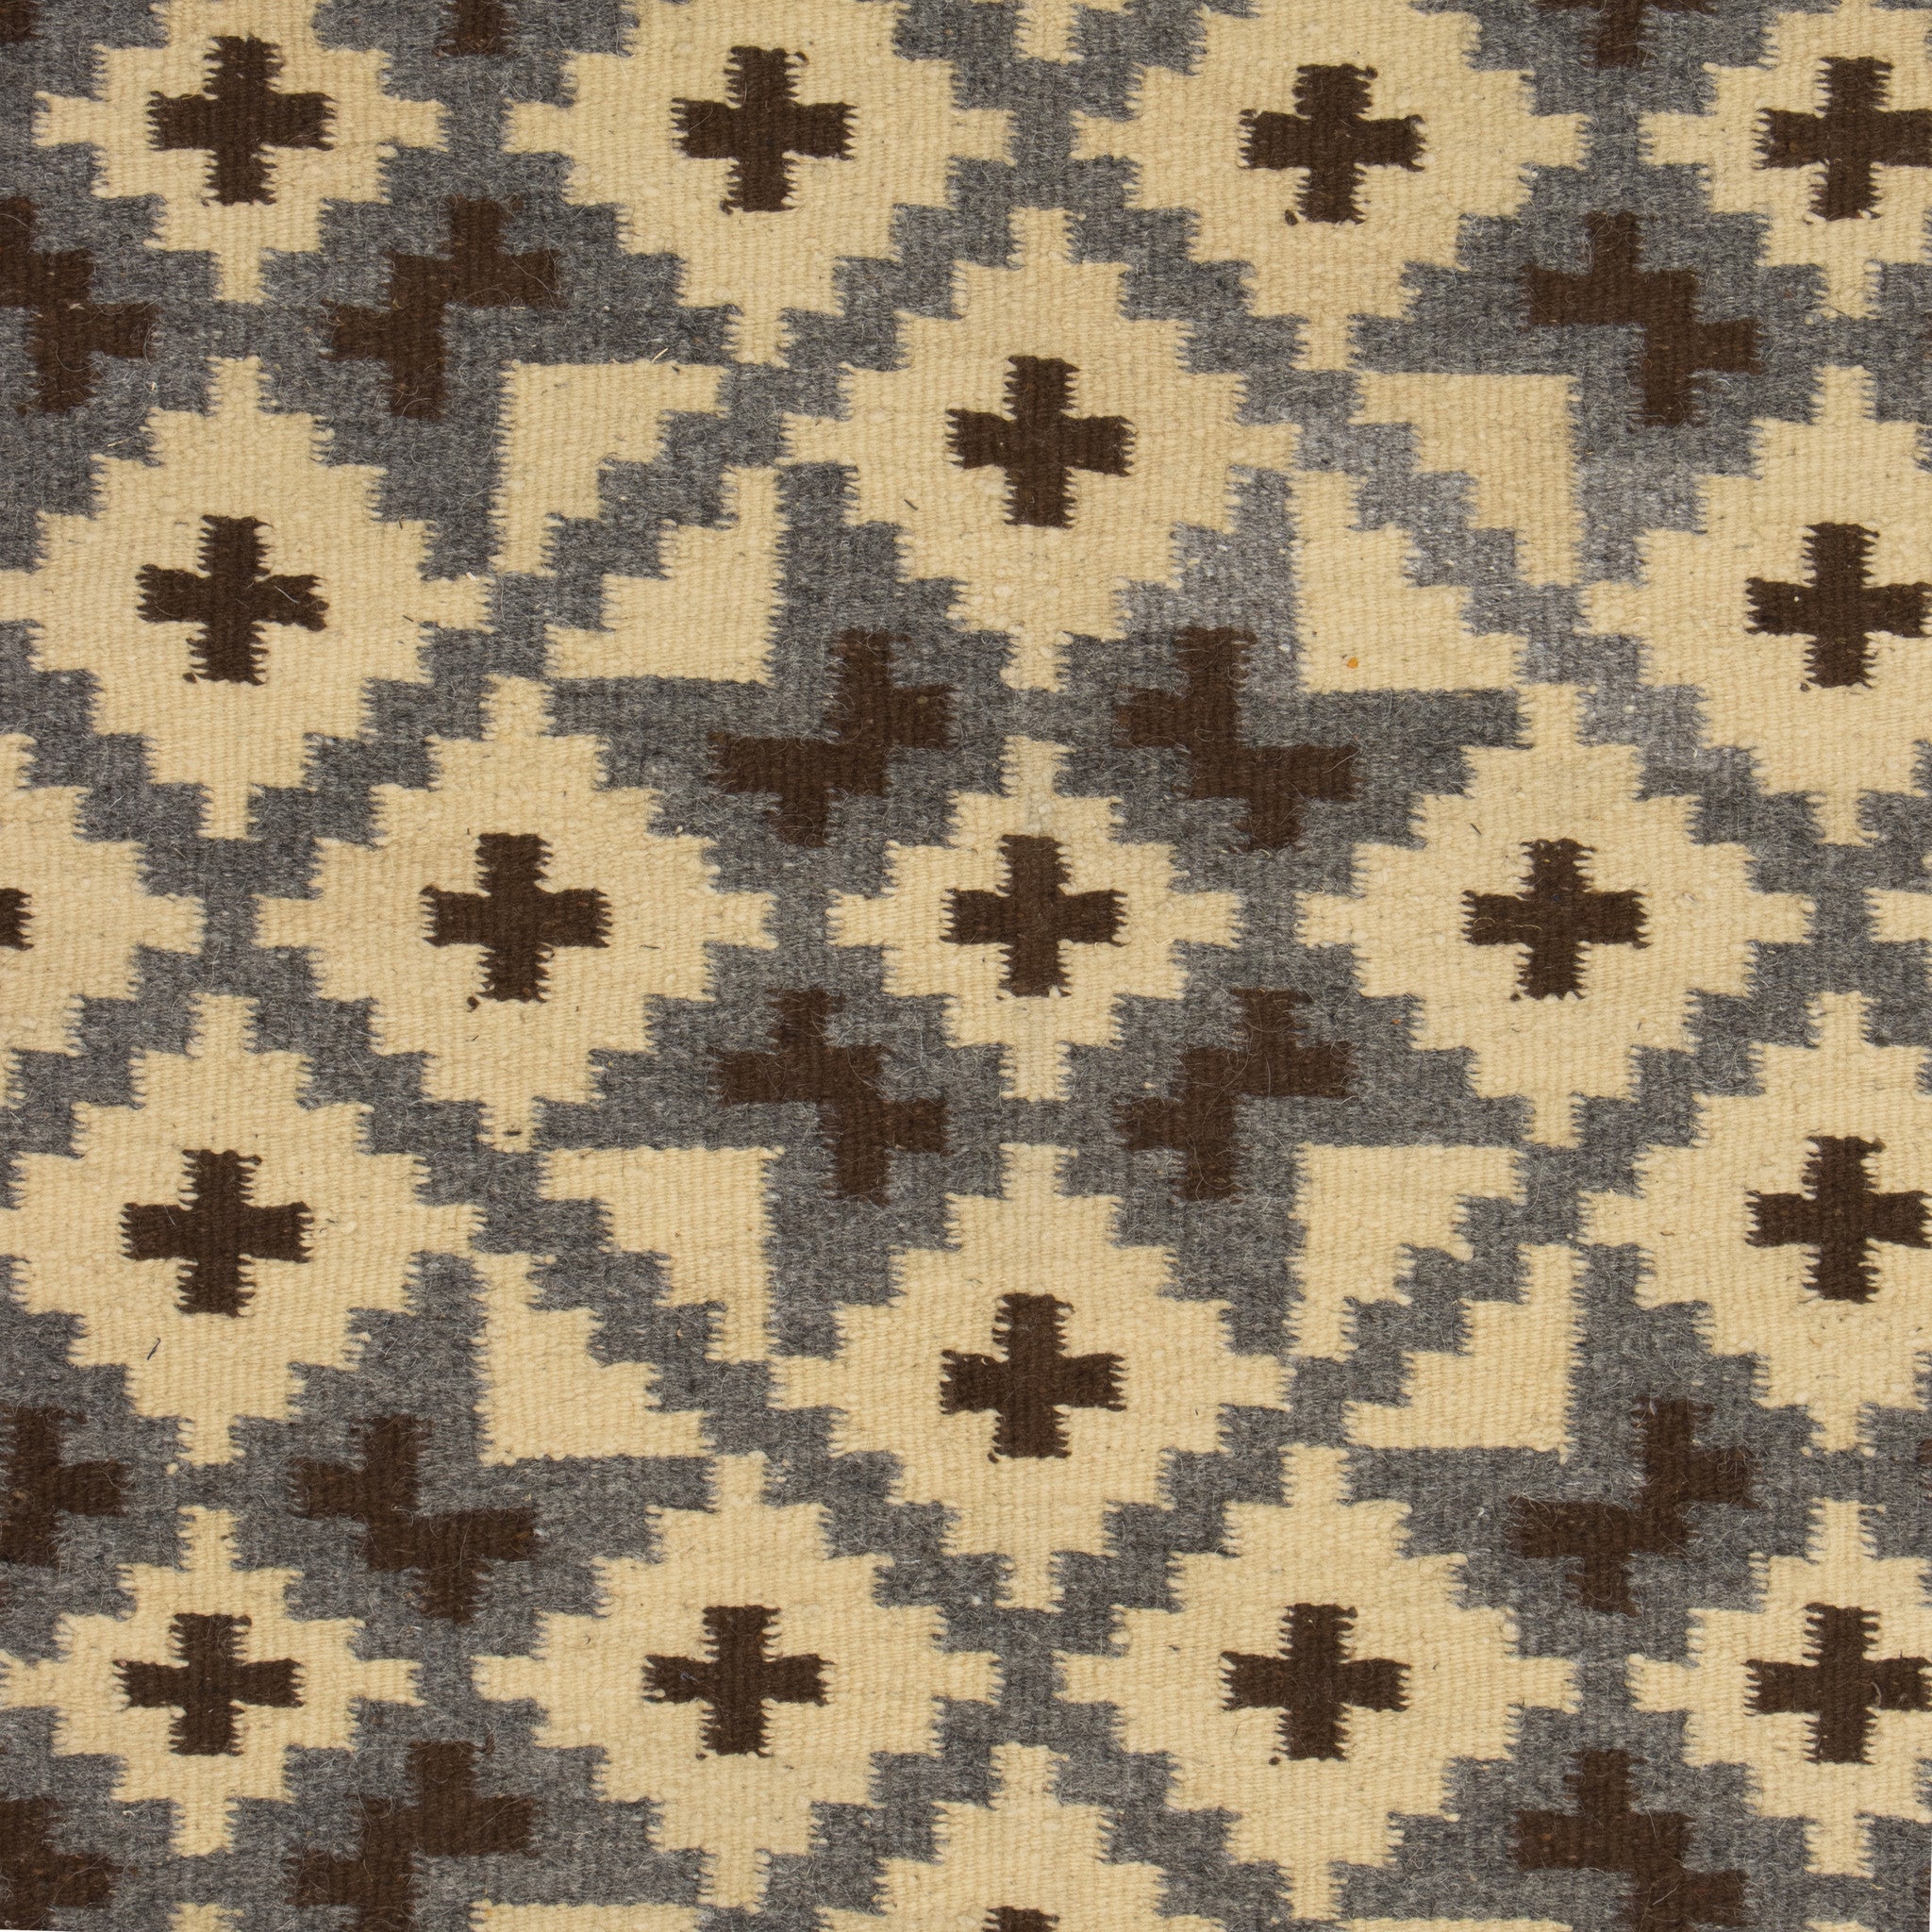 Navajo Inspired Mexican Weaving